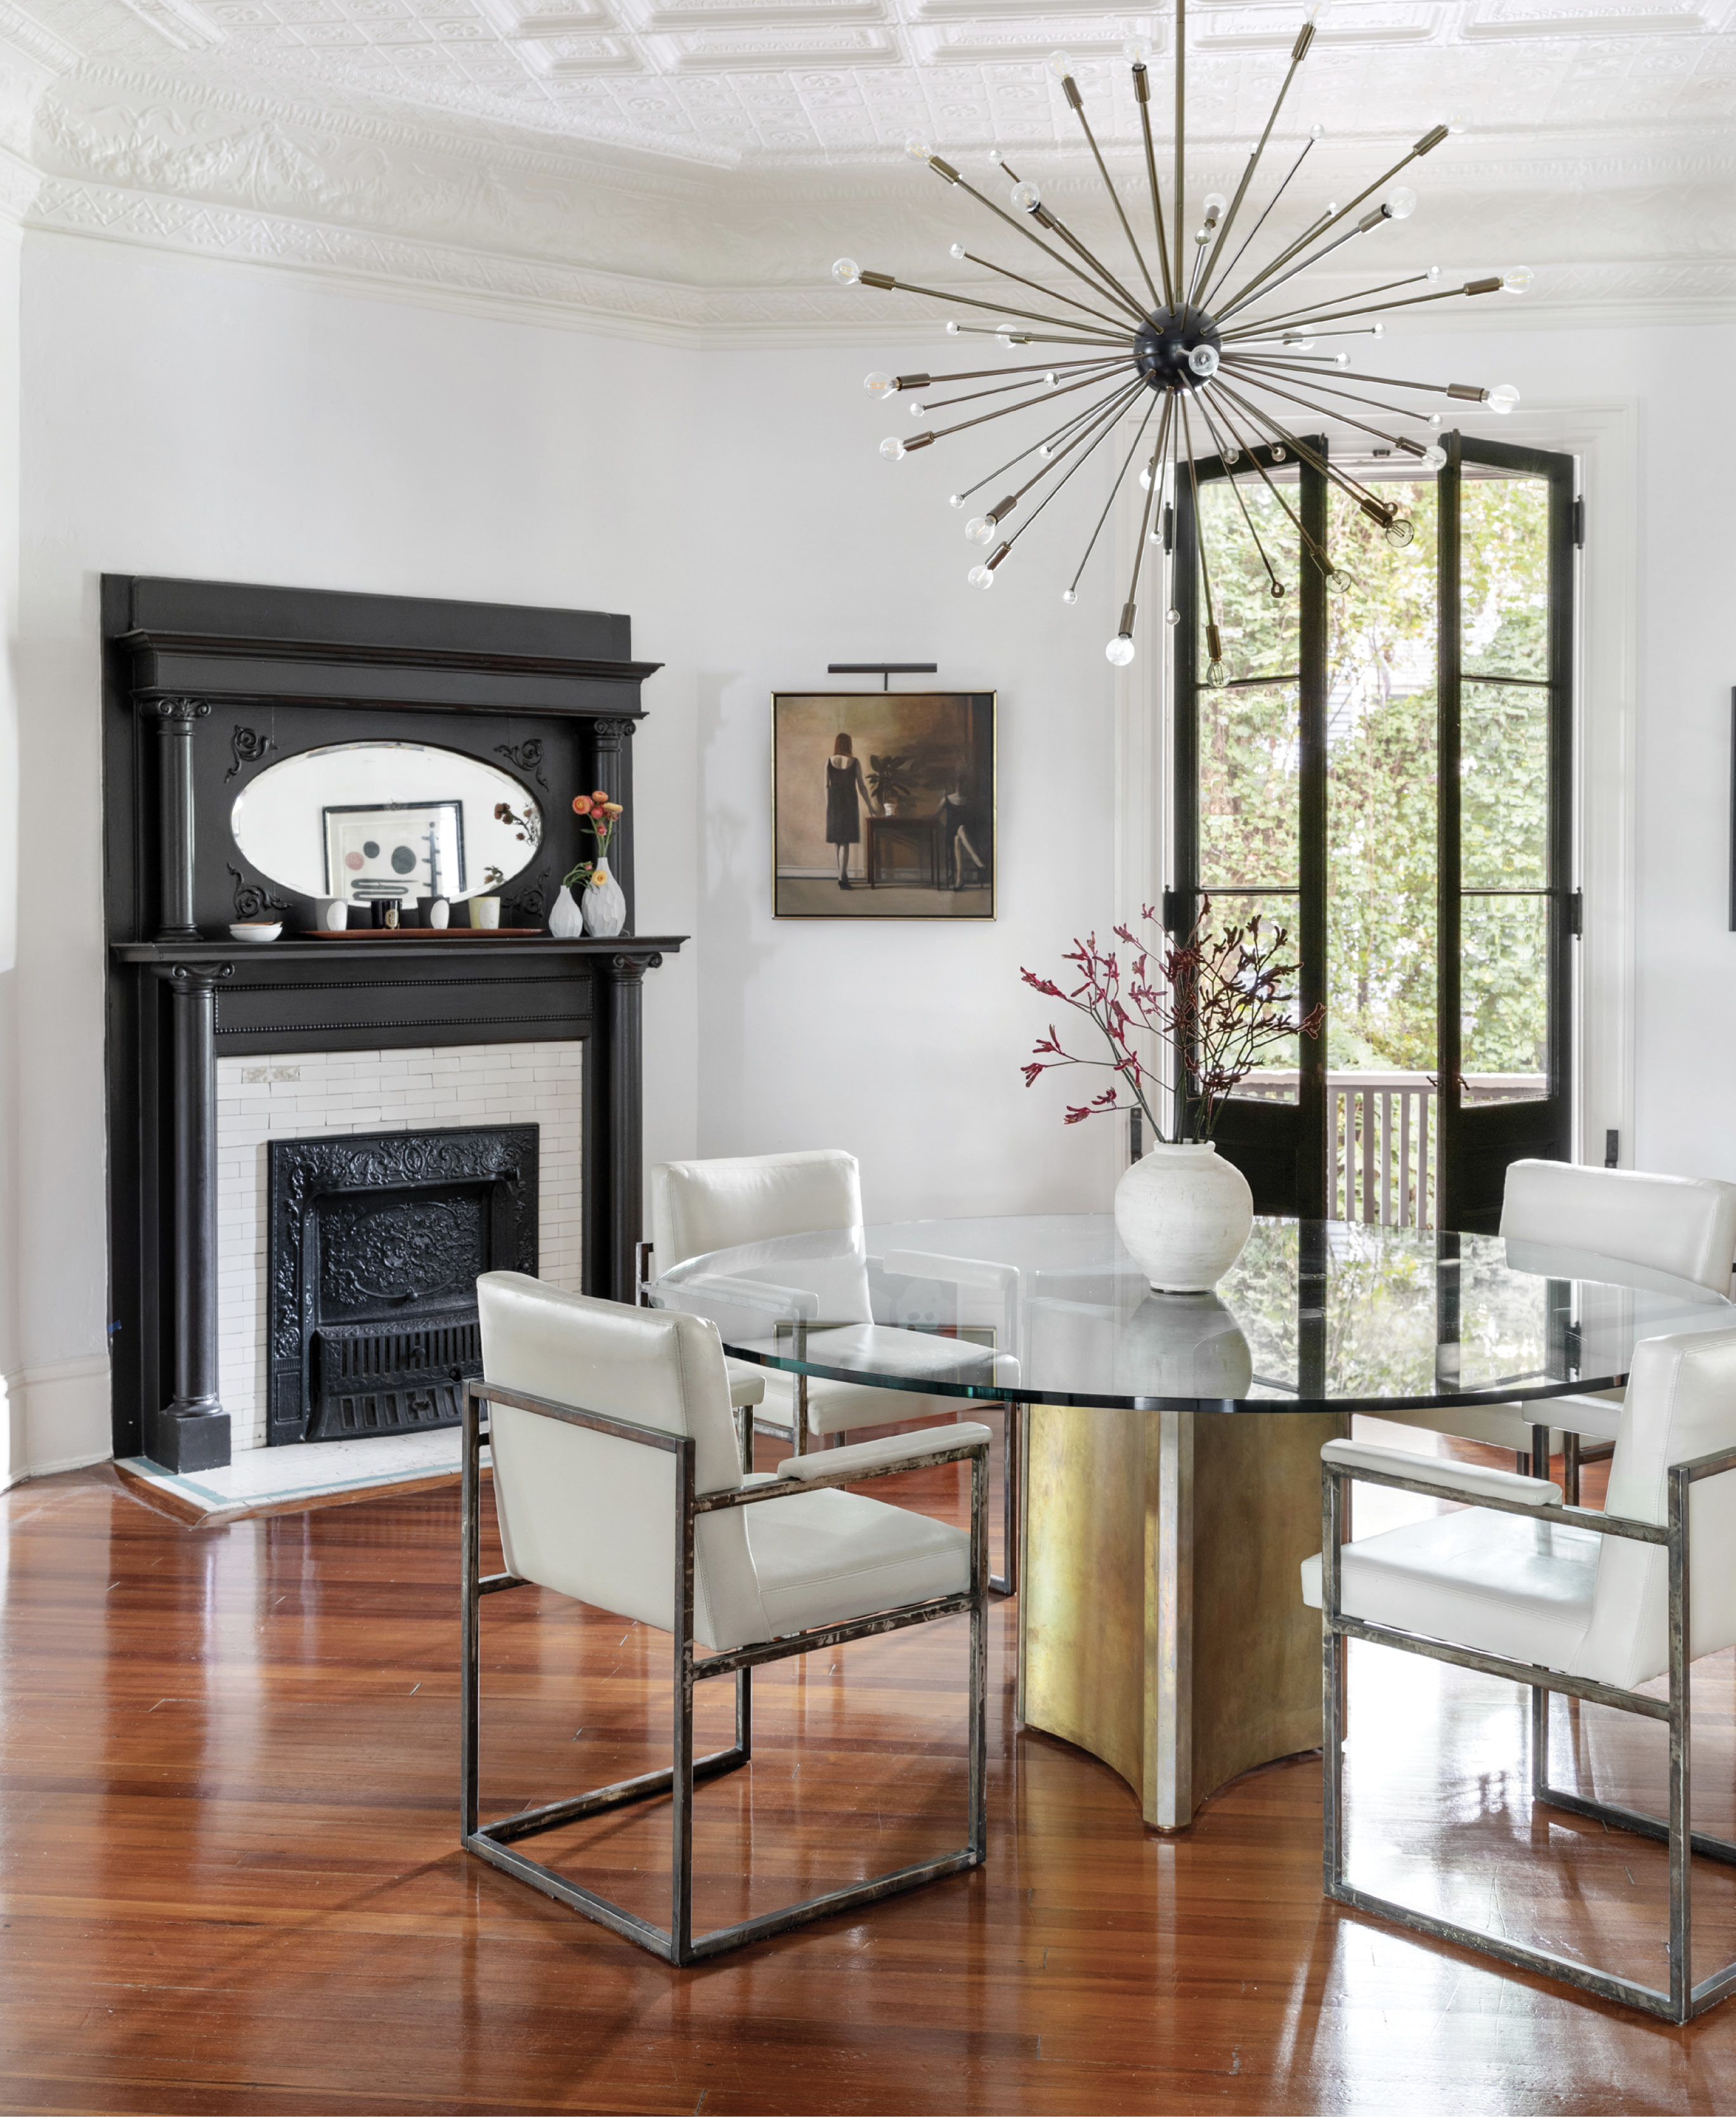 Statement Pieces: In the dining room, the clean modern lines of the brass and metal table and vintage Mastercraft metal-frame chairs mesh with historical features, including the original fireplace and quarter-sawn pine floors. The stark white walls help draw the focus to the ornate ceiling and large “Imogene” chandelier from Arteriors Home.